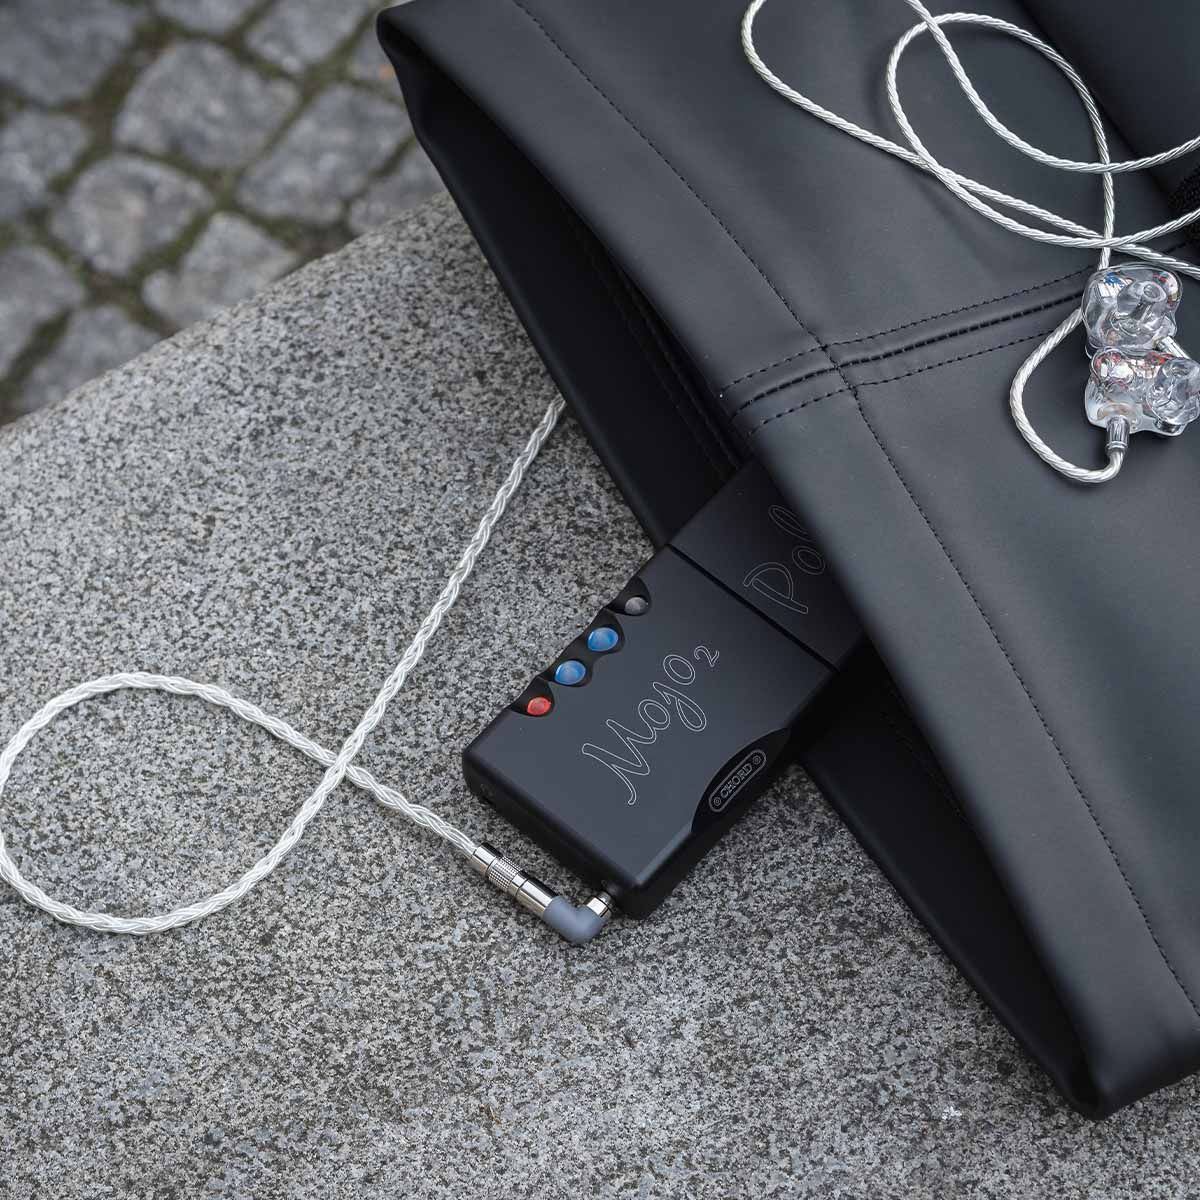 Chord Mojo 2 connected to in-ear headphones in a purse outside